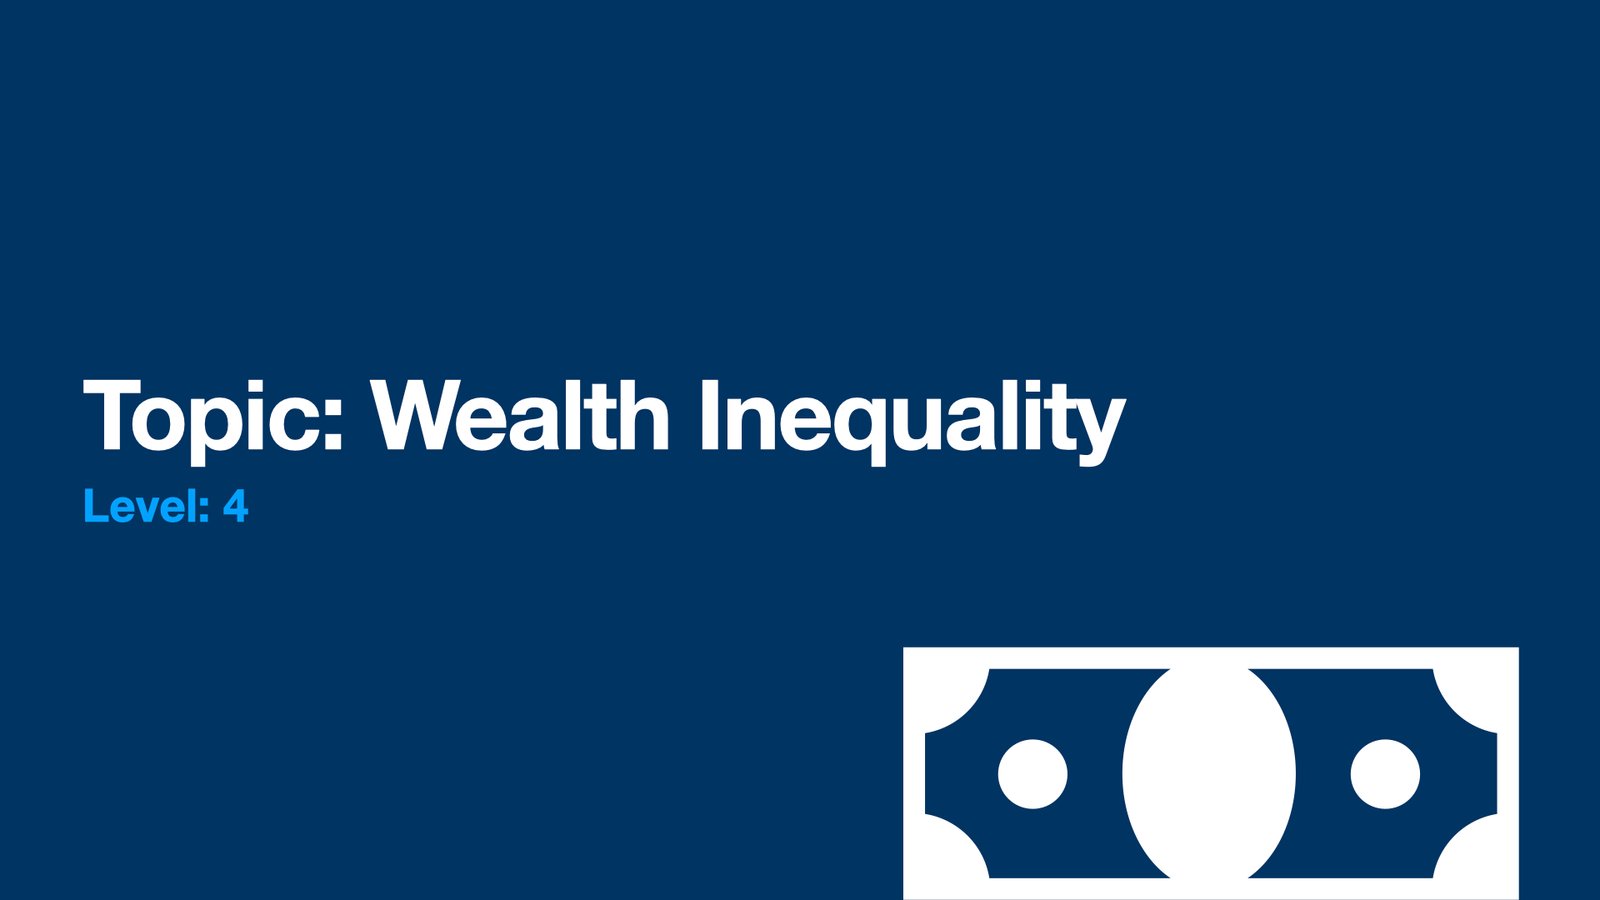 Educational slide on wealth inequality discussion.